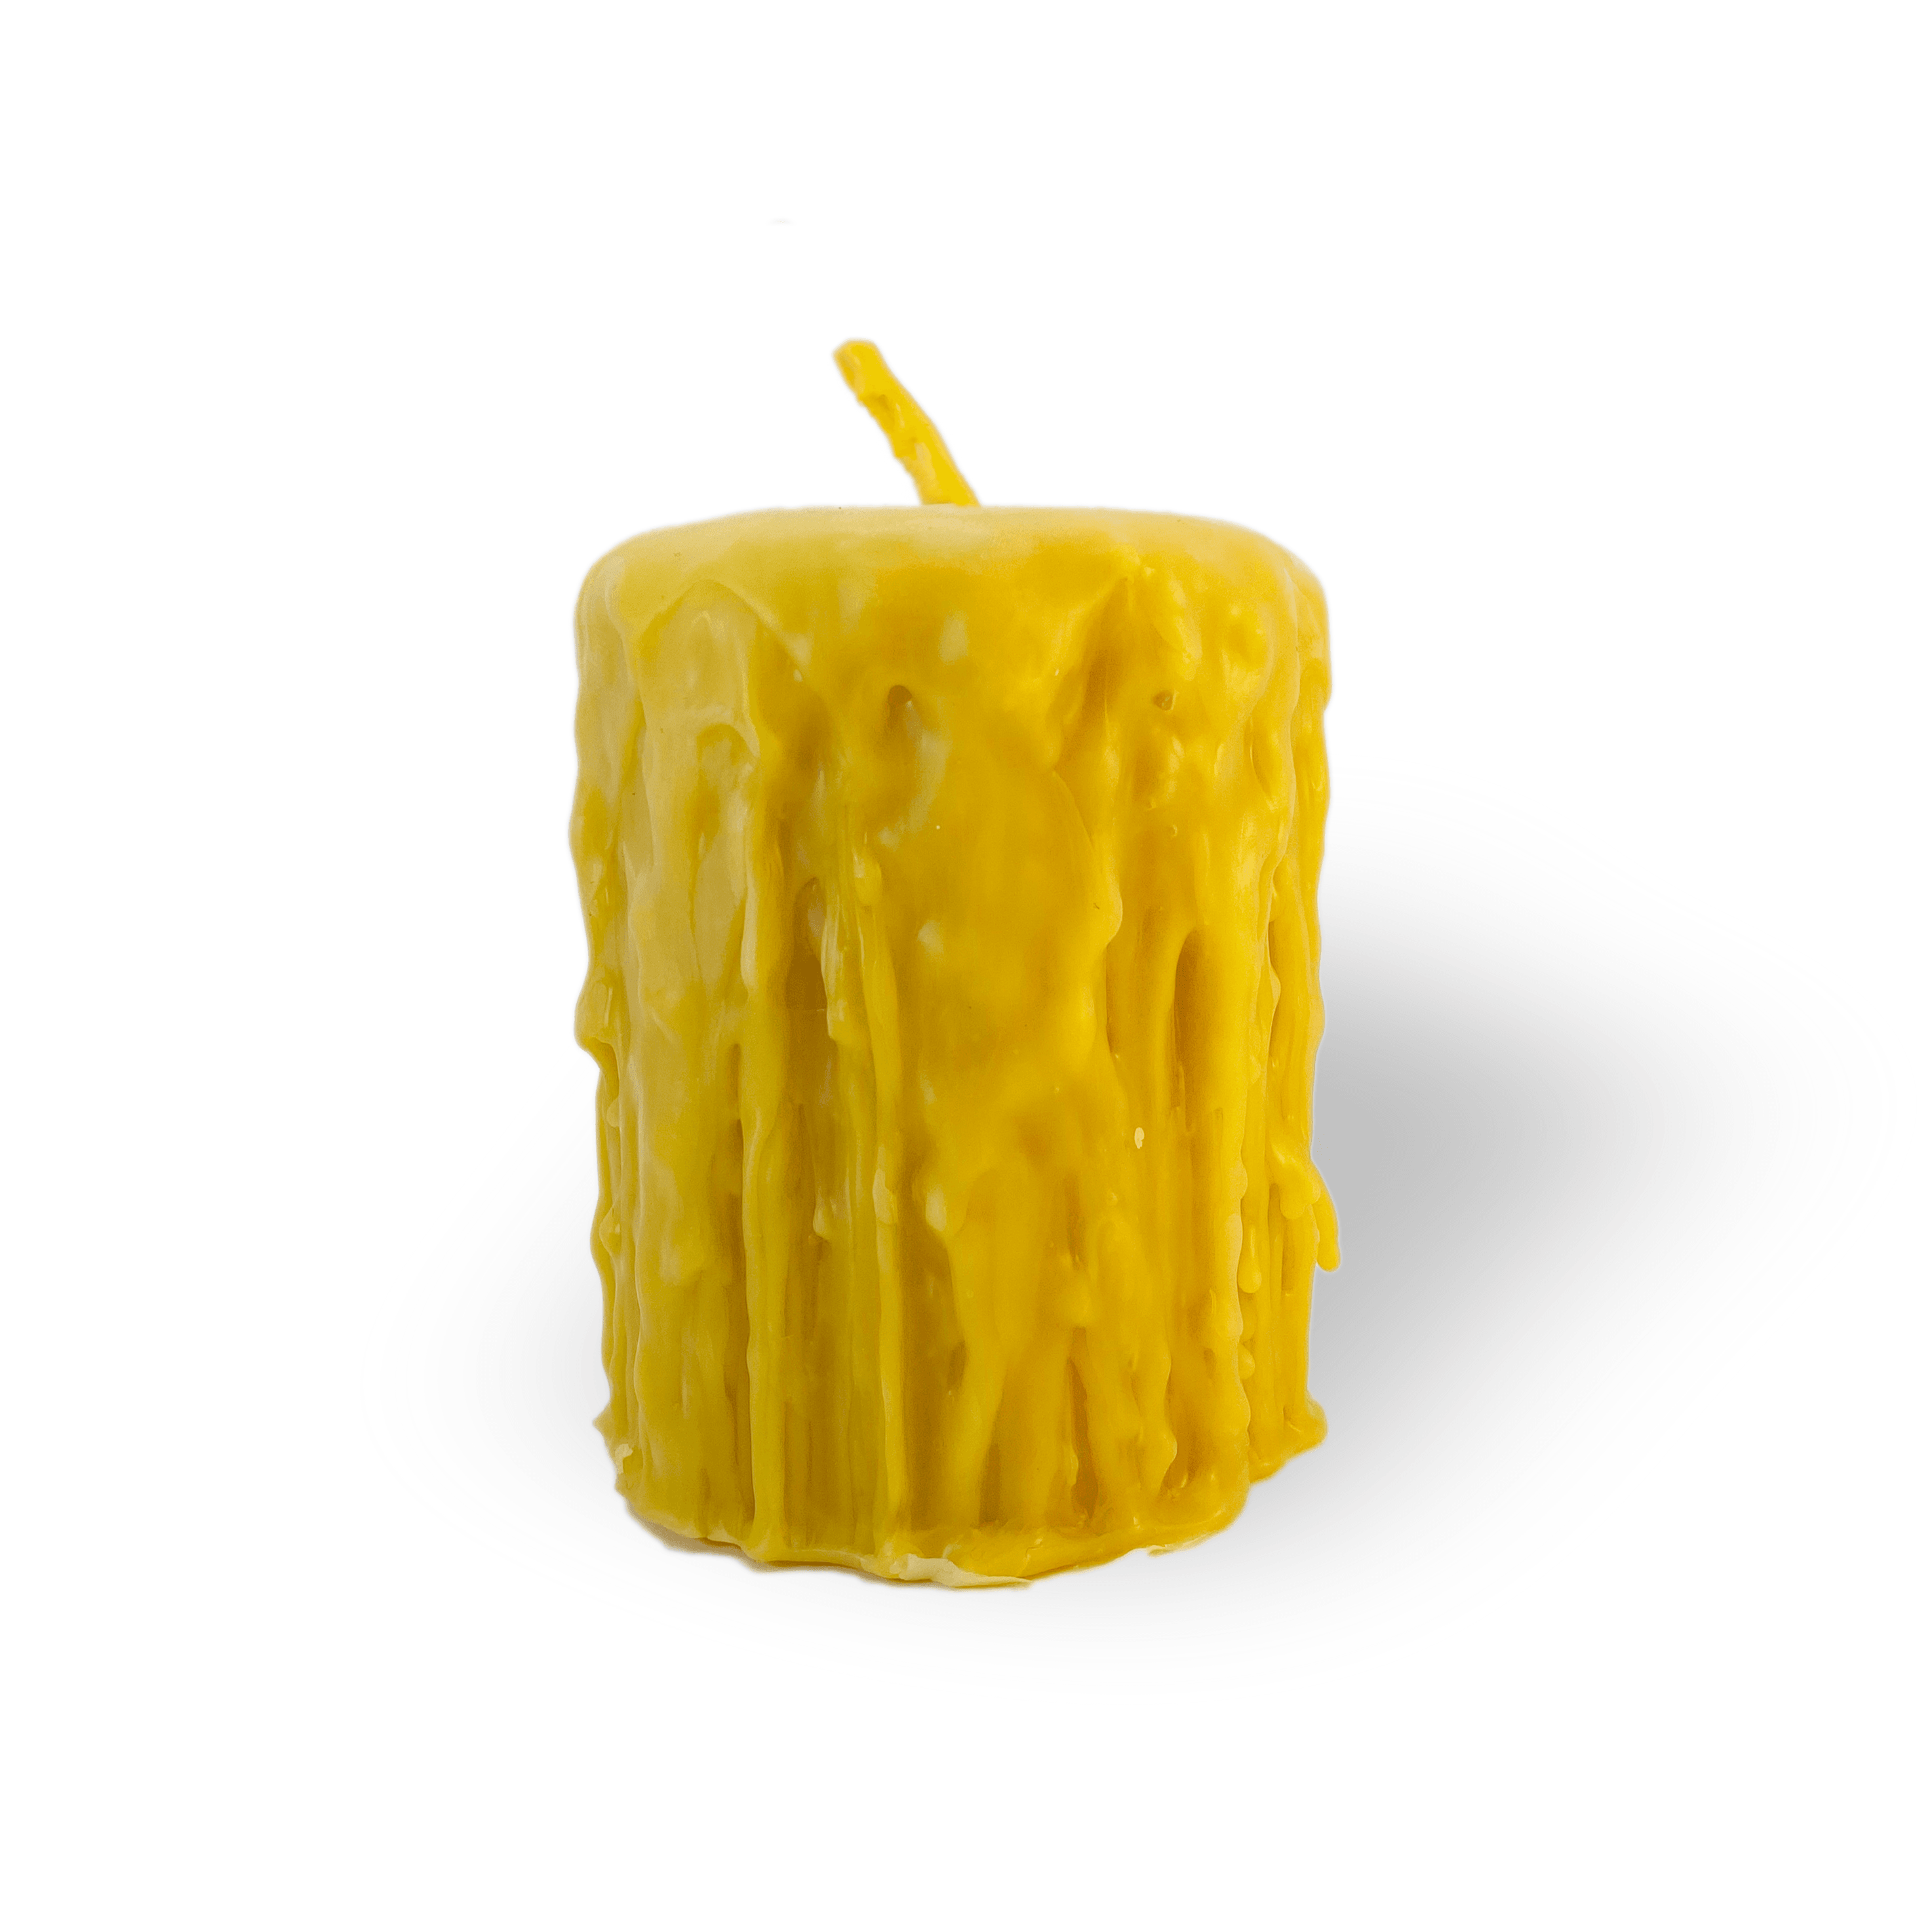 Wholesale Beeswax Candles Program – Honey Candles Canada